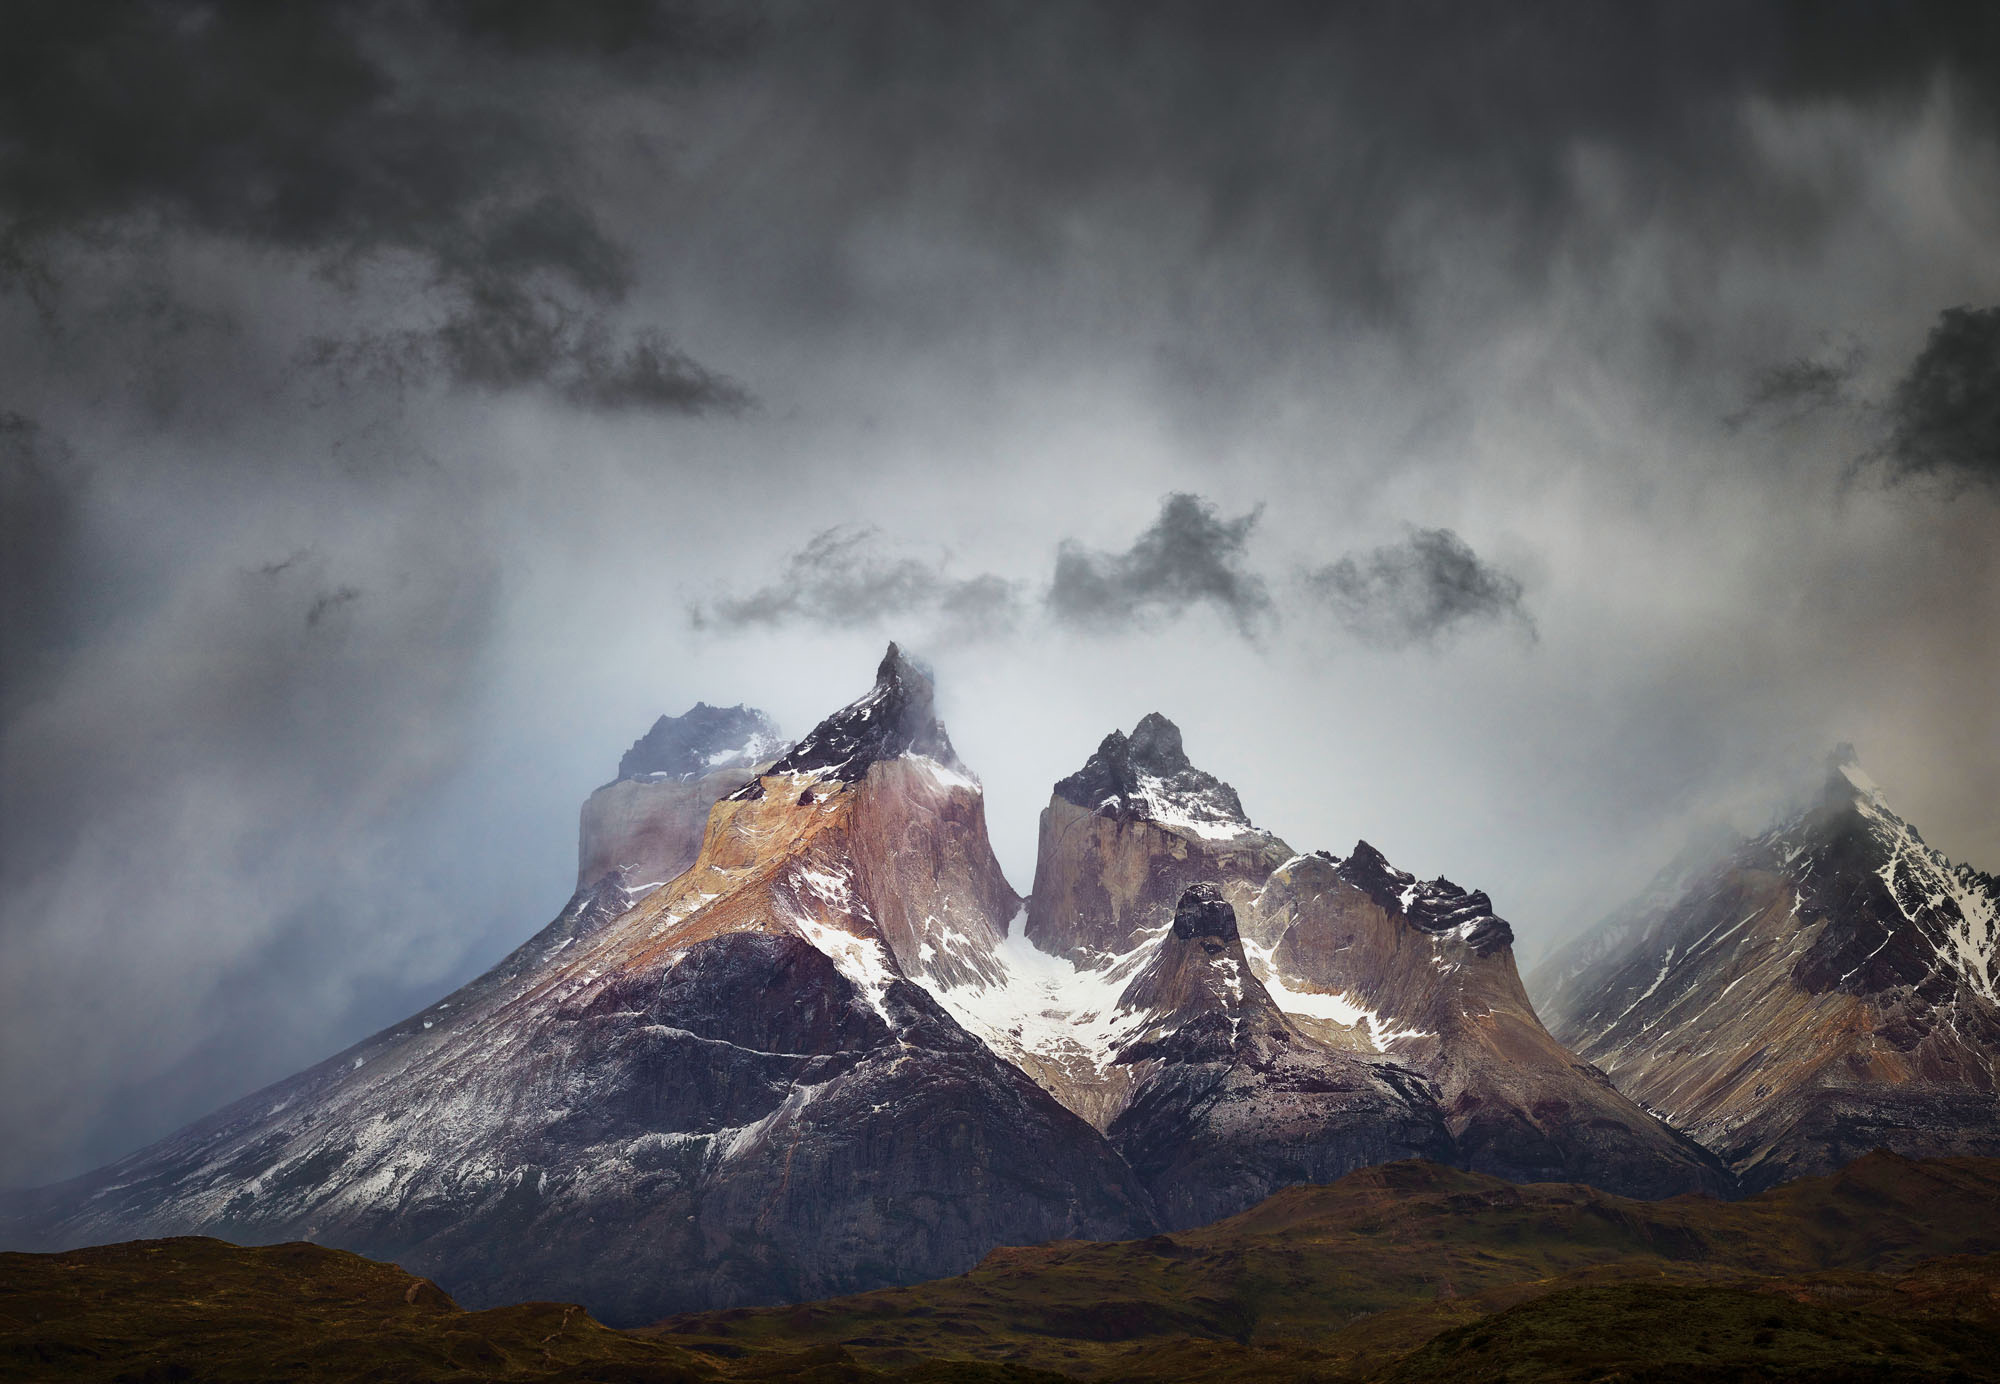 Torres del Paine, Chile. Phase One XF, IQ180, Schneider 110mm lens, f8 @ 1/20 second, ISO 35.